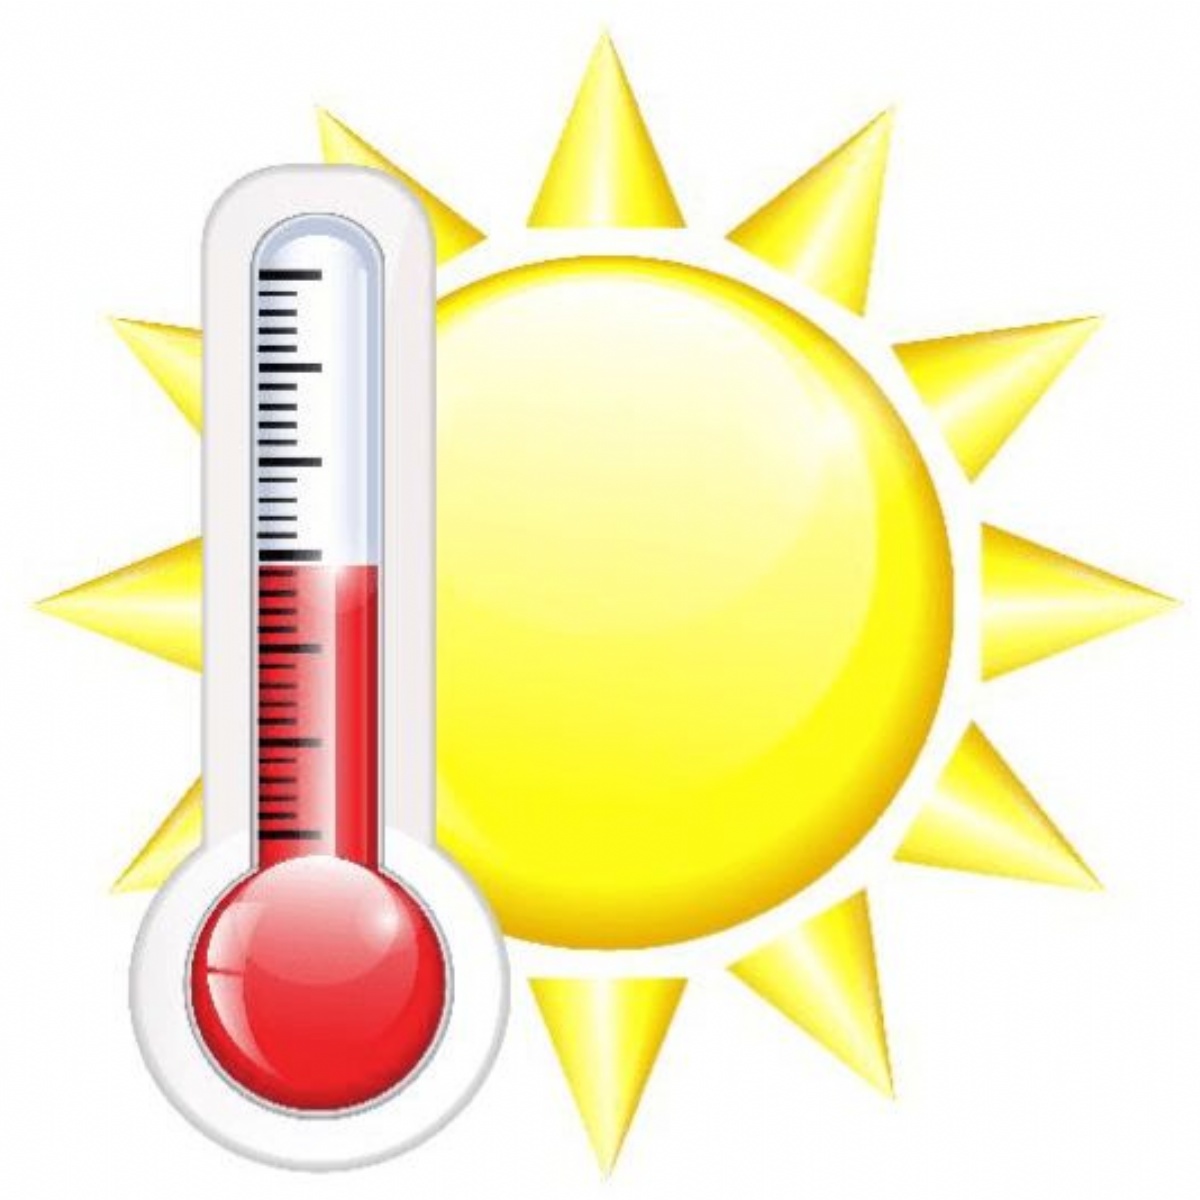 Tetherdown School - Extreme Heat w/c 18th July and Early Dismissal